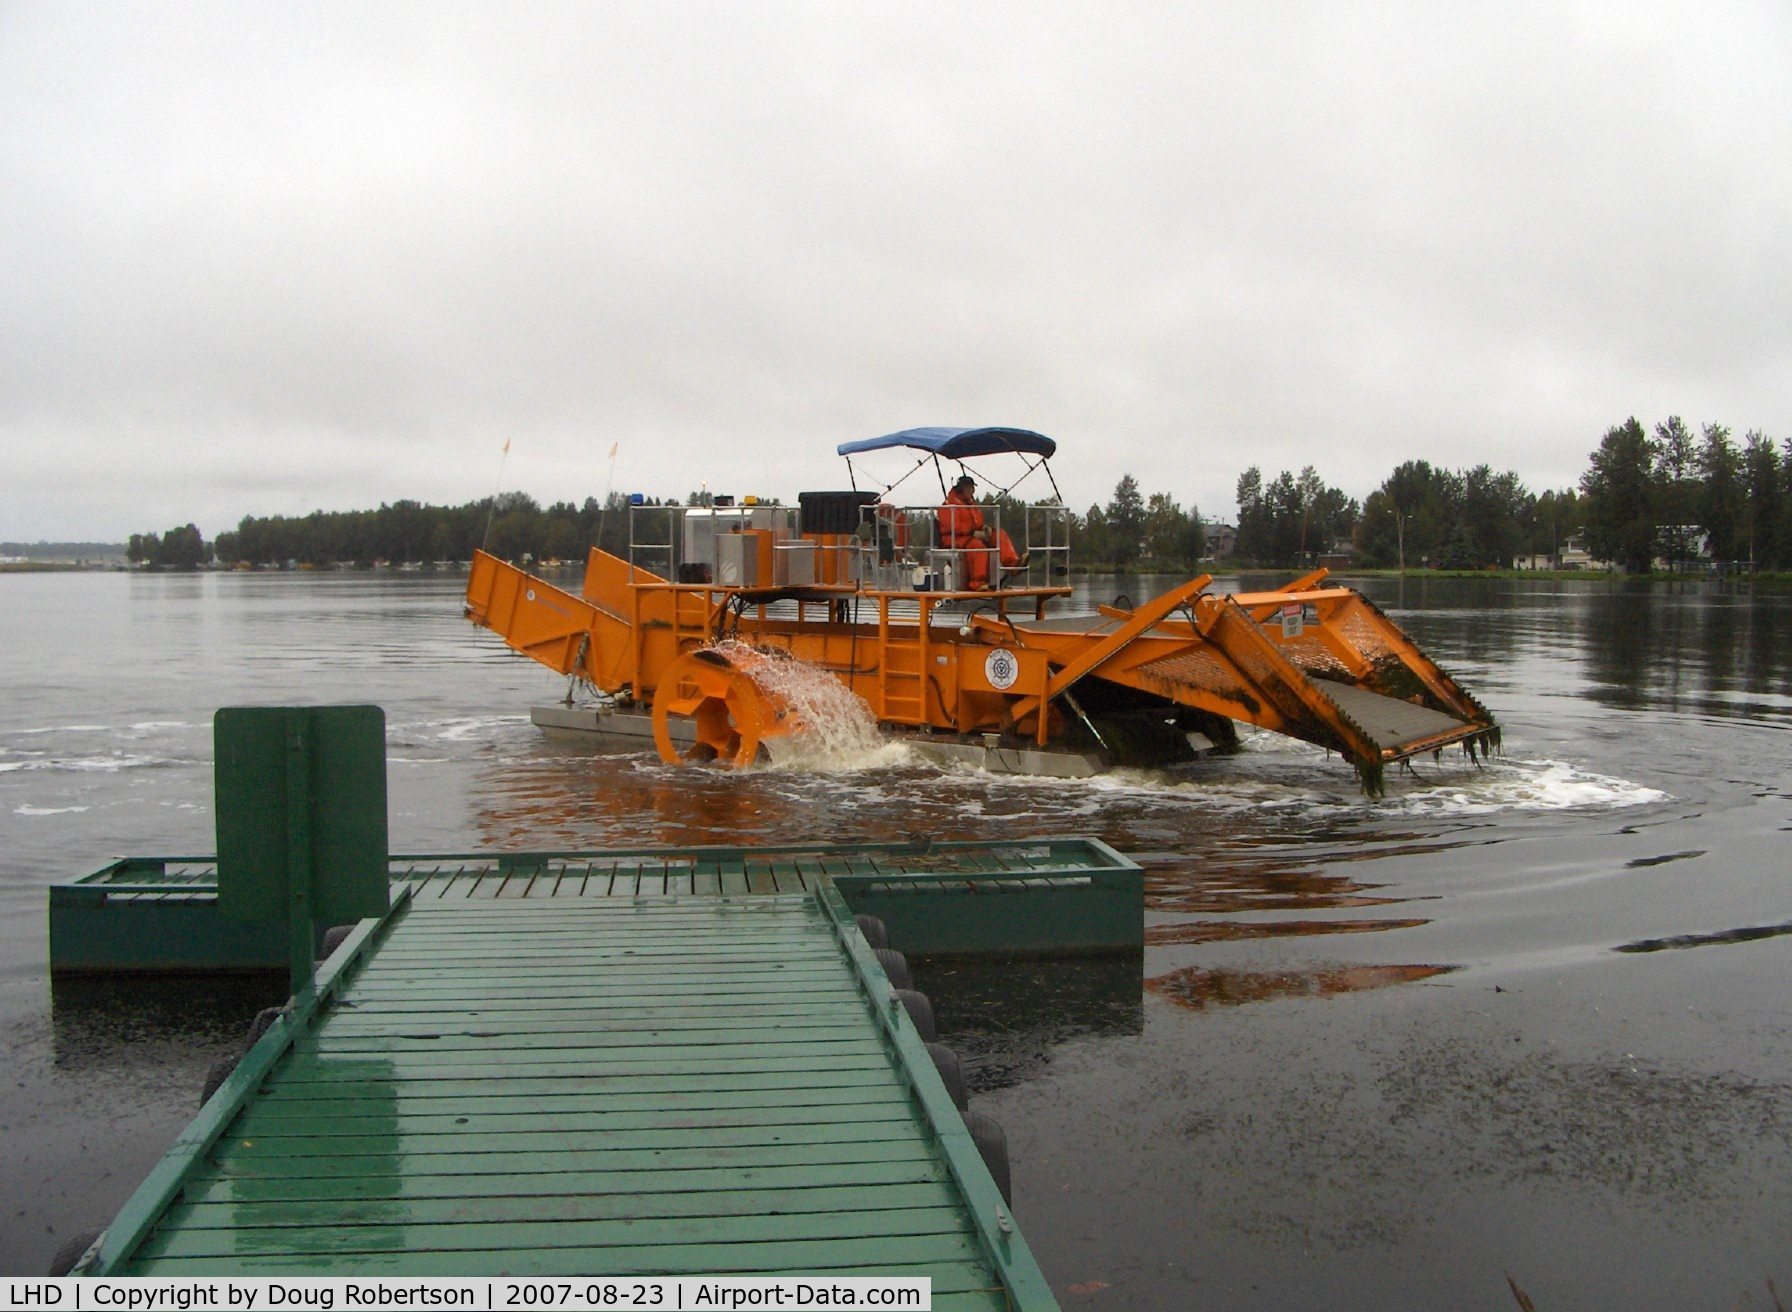 Lake Hood Seaplane Base (LHD) - Lake Hood SPB's water weed cutter/scooper keeping busy clearing taxi lanes-scooper raised